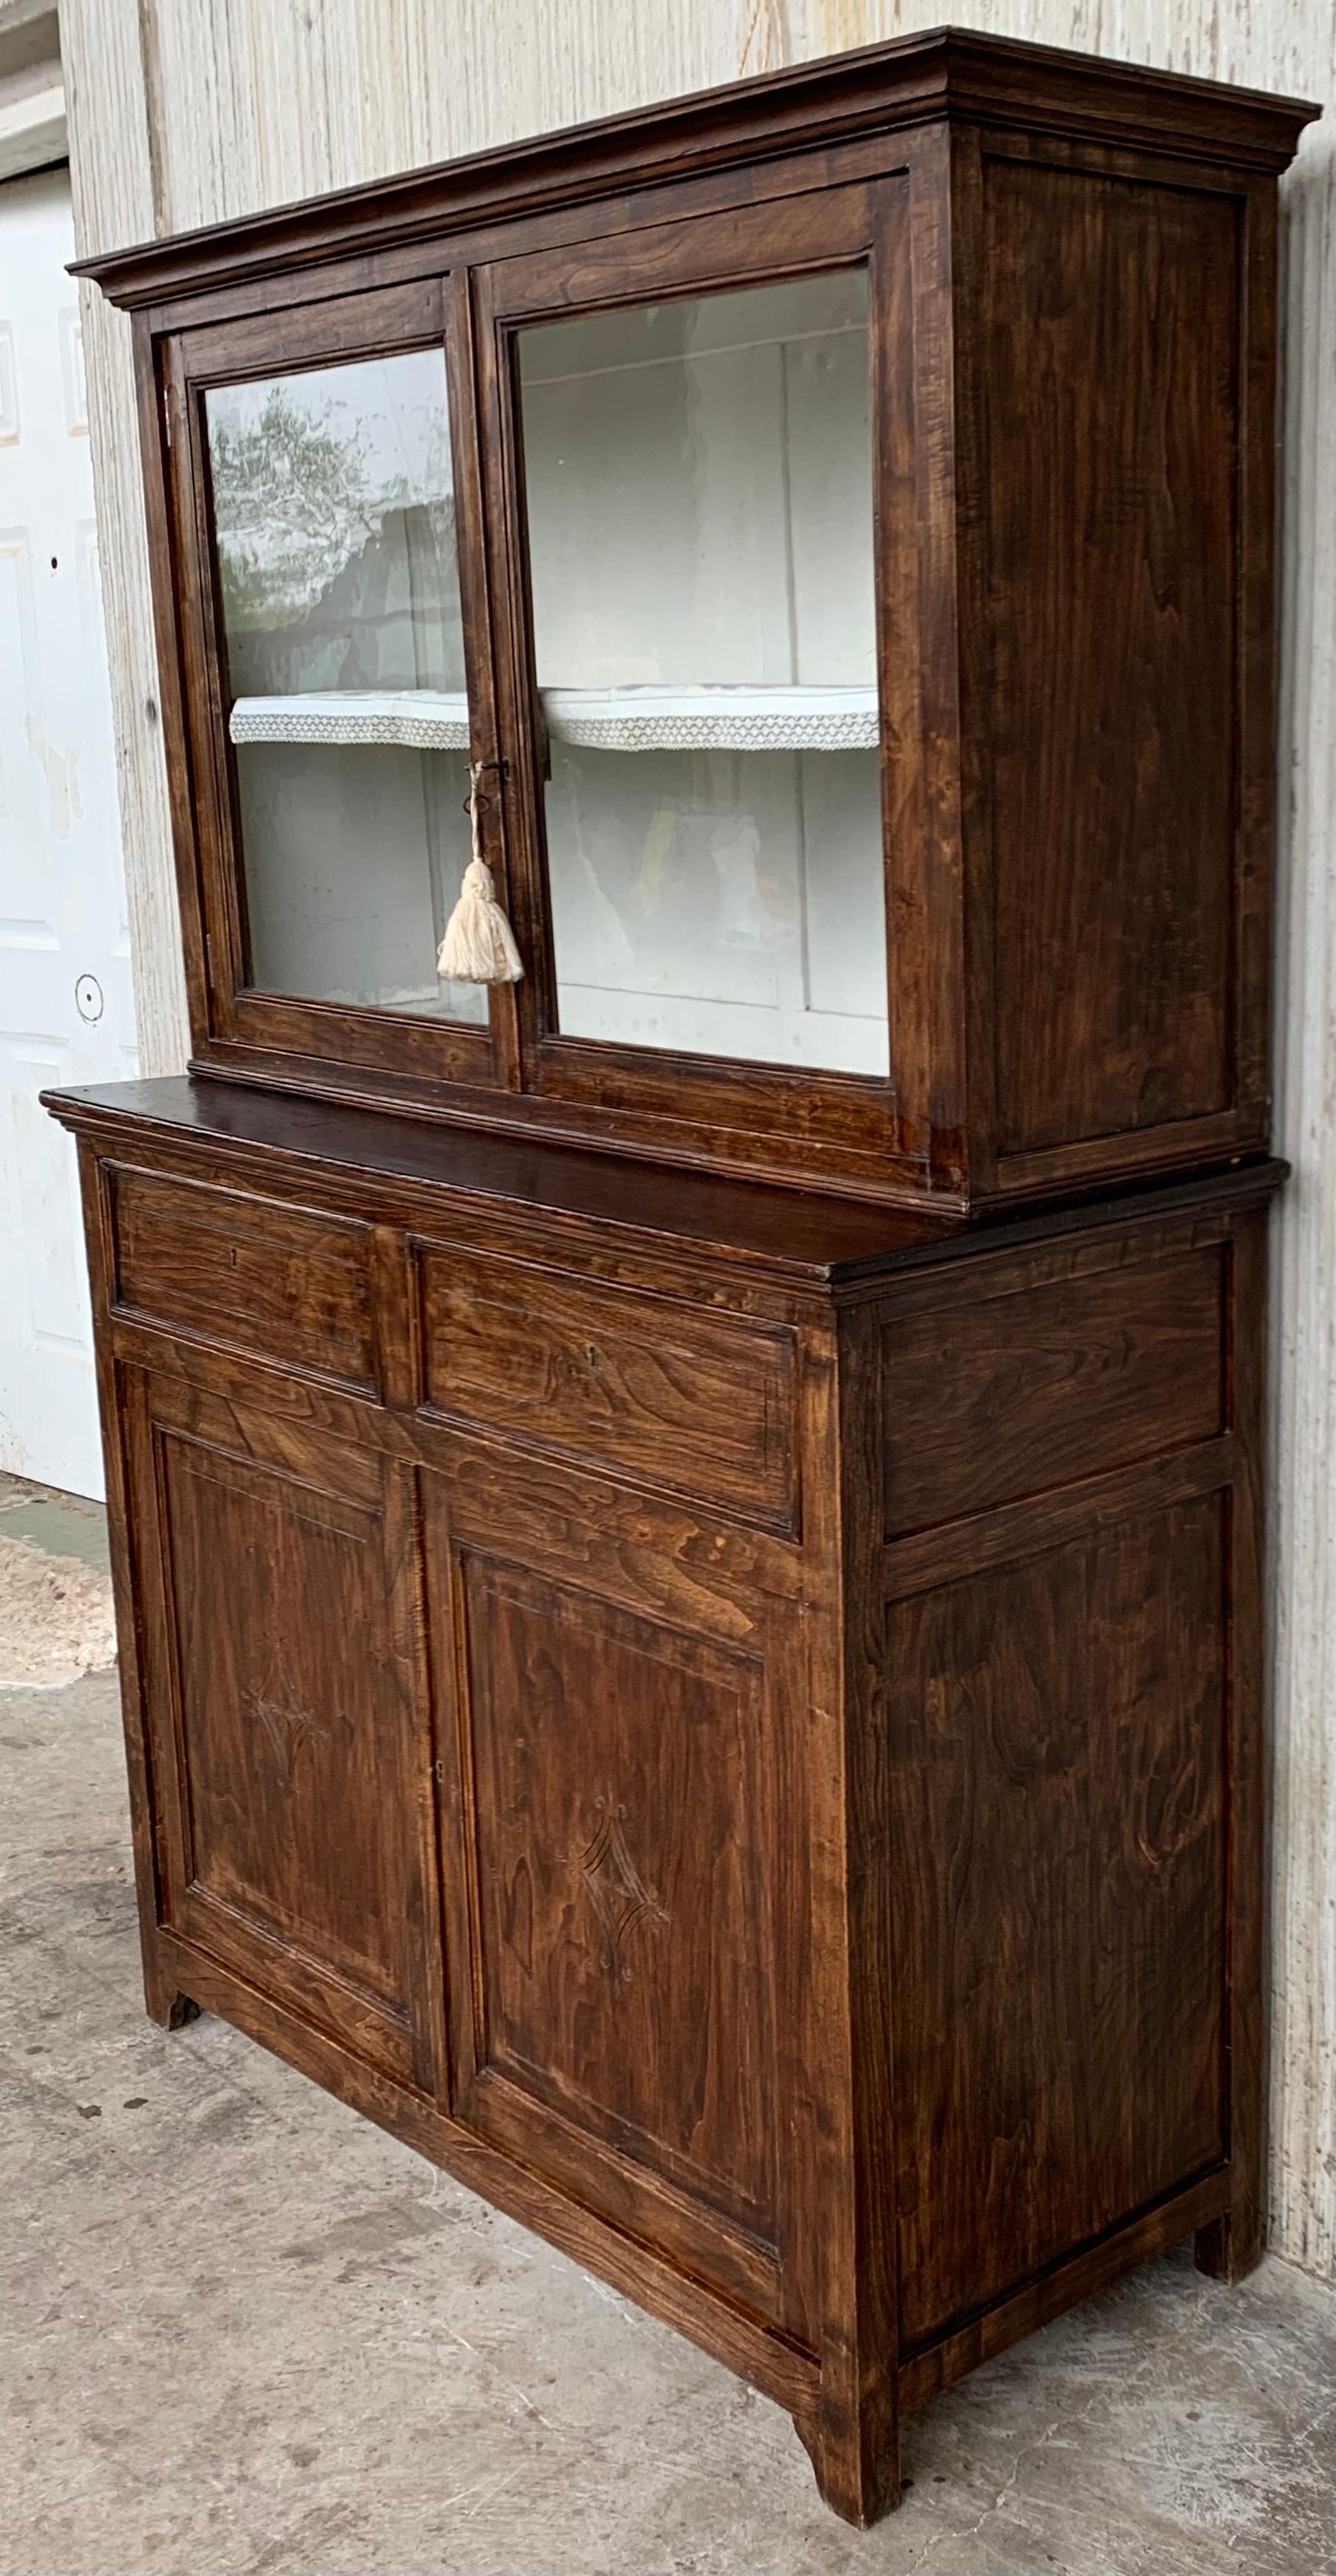 French Provincial Mid 19th Century Two Part Step Back Walnut Pie Safe Cupboard with Glass Doors